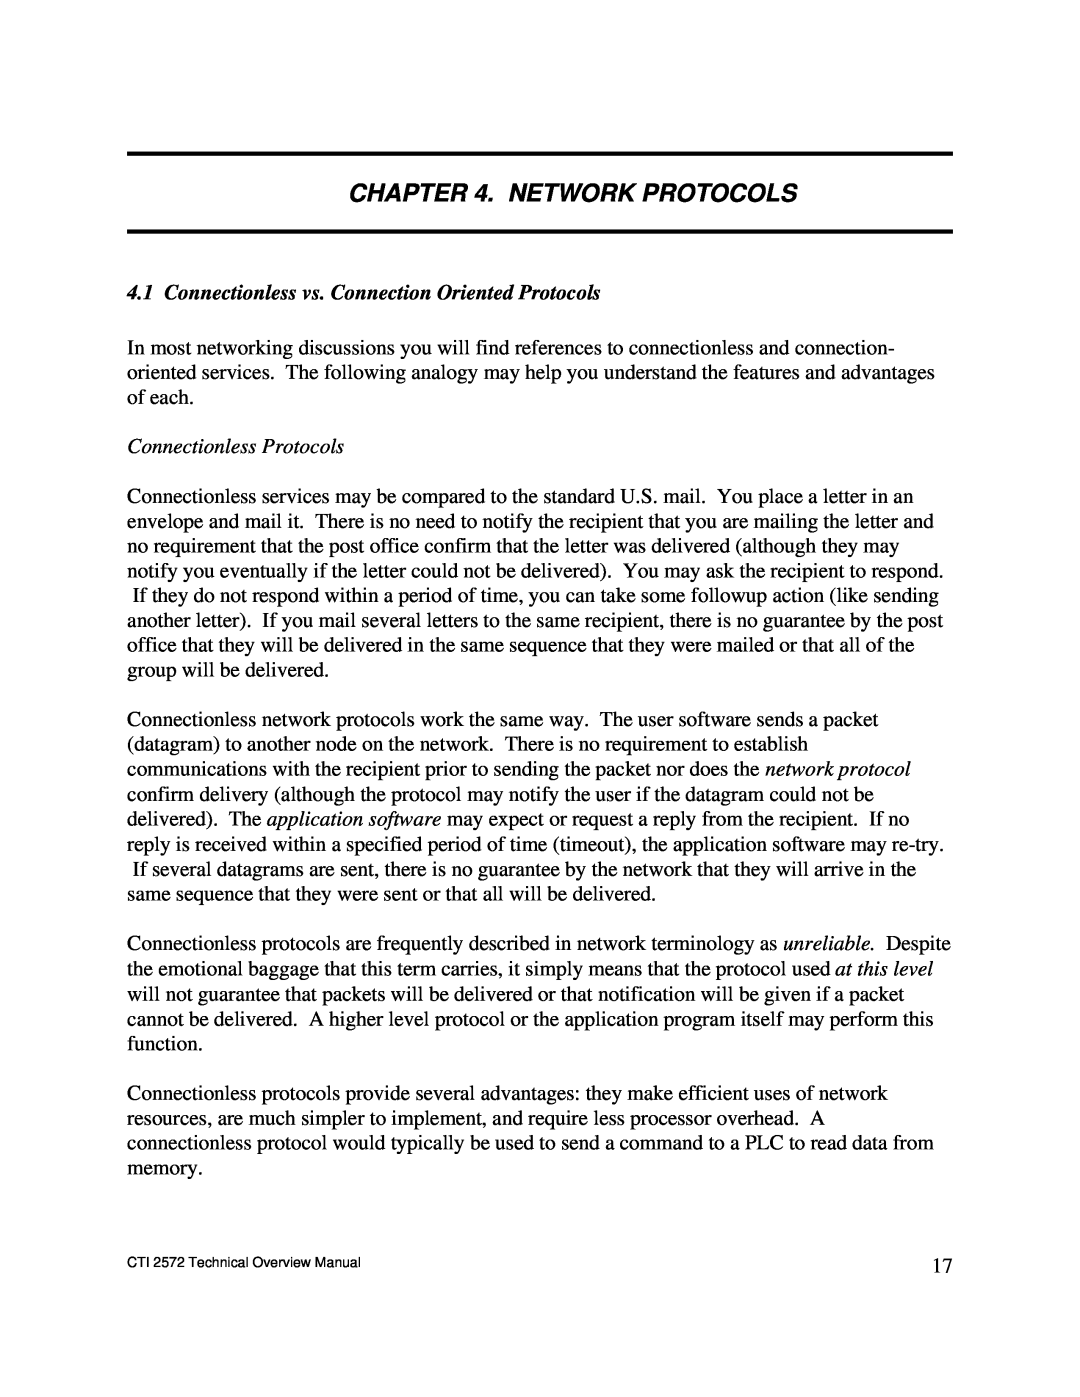 IBM CTI 2572 manual Network Protocols, Connectionless vs. Connection Oriented Protocols 